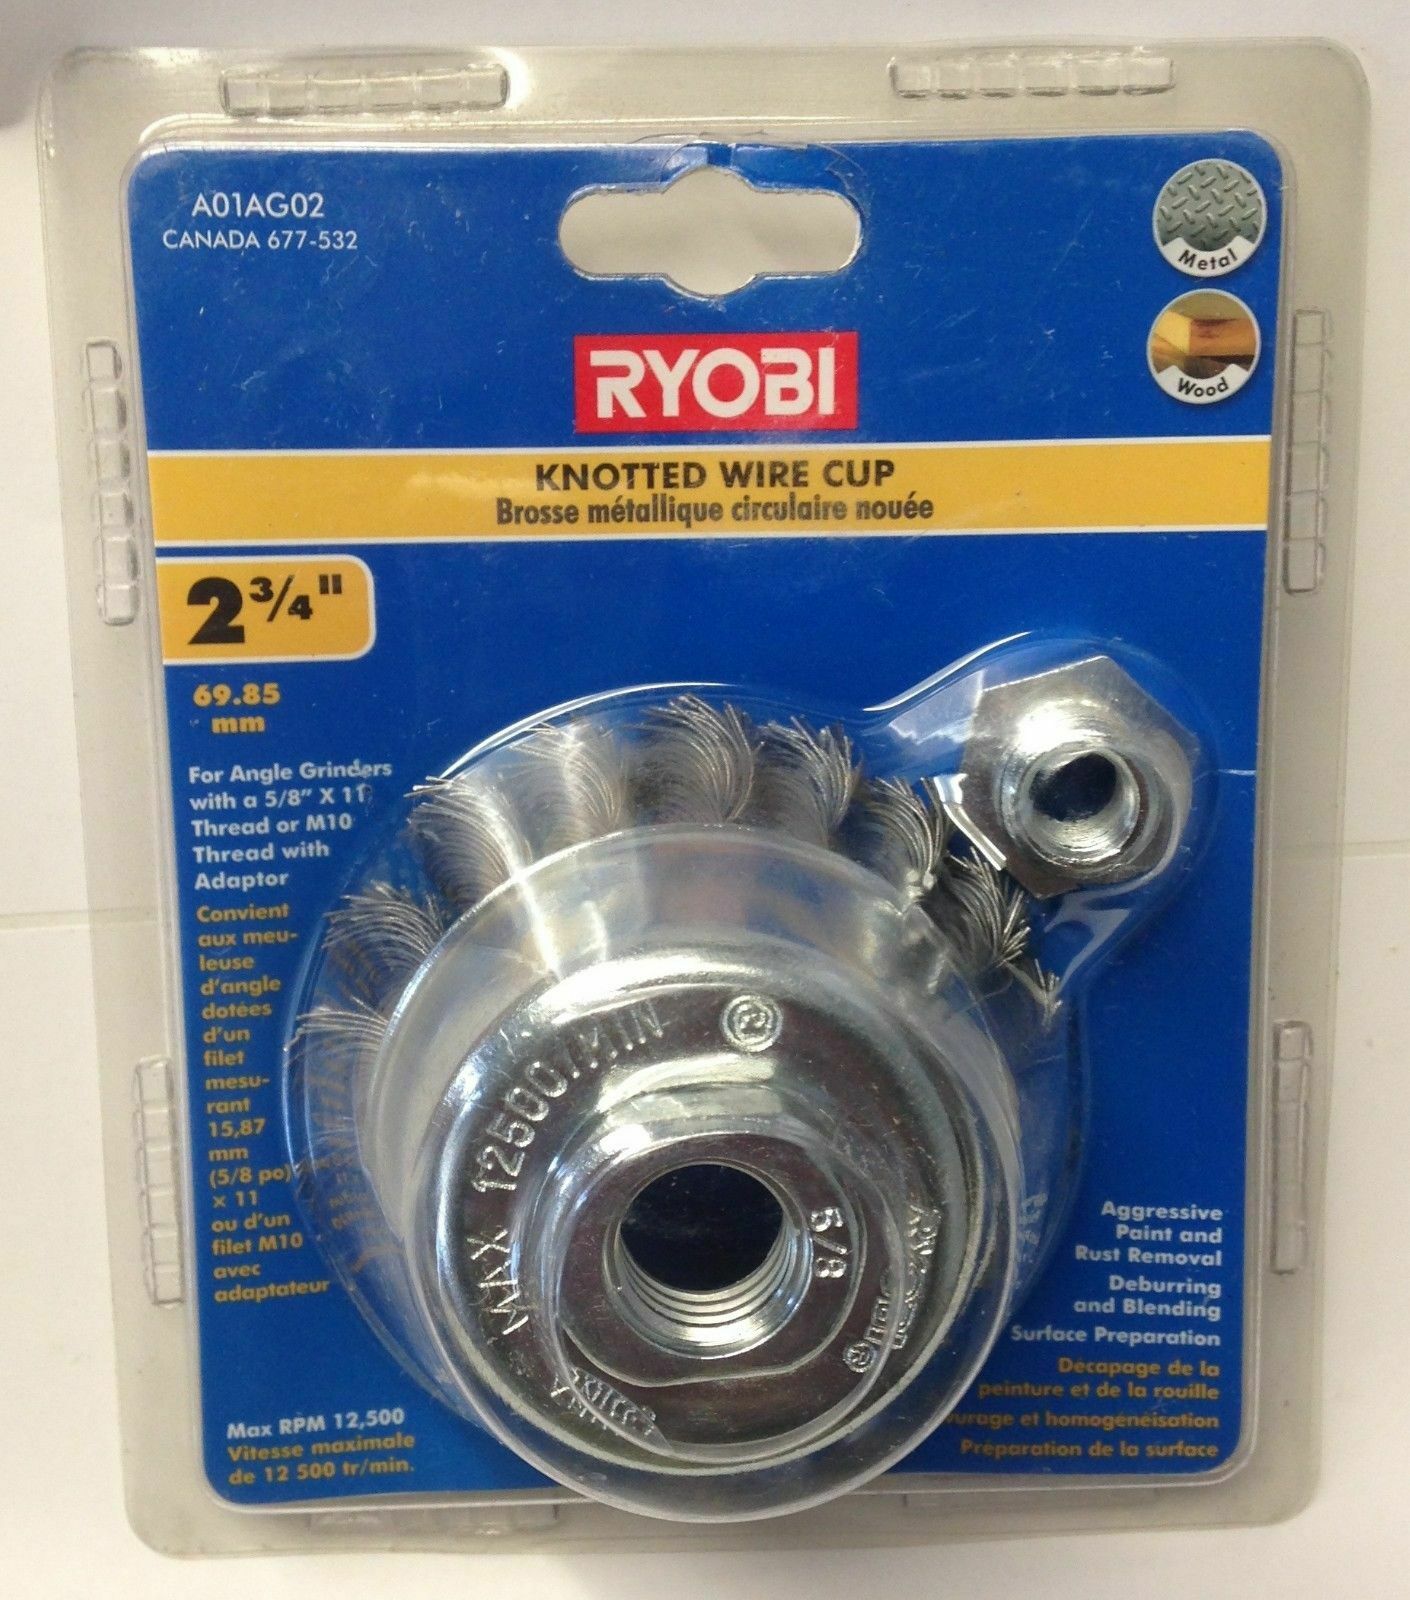 Ryobi A01AG02 2-3/4" Knotted Wire Cup Wheel For Metal & Wood